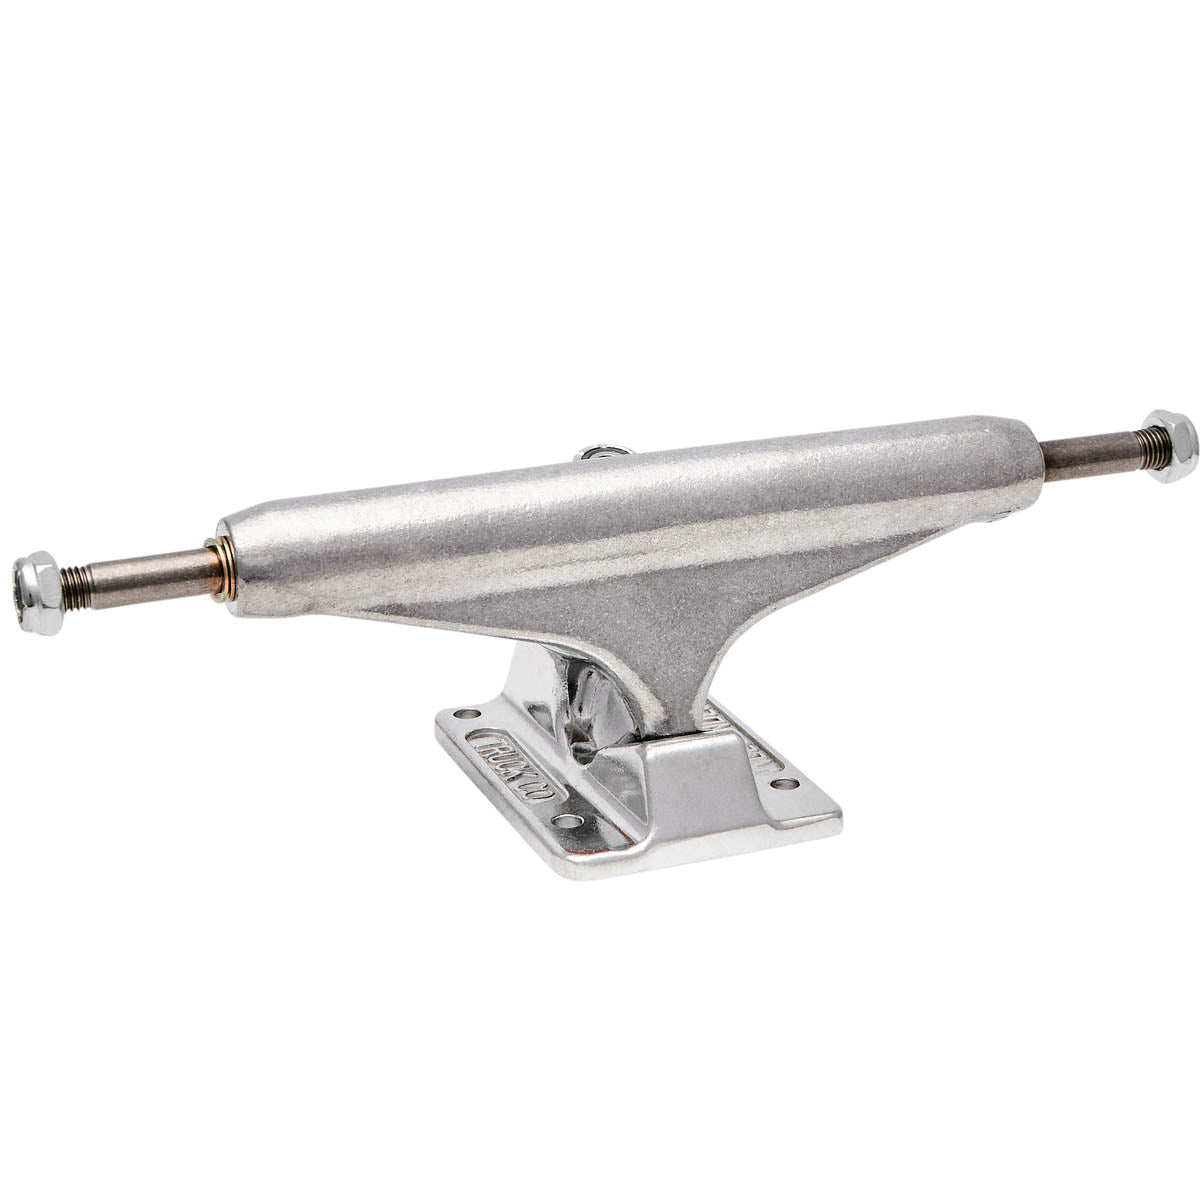 Independent Stage 11 Forged Titanium Skateboard Trucks - Silver image 1